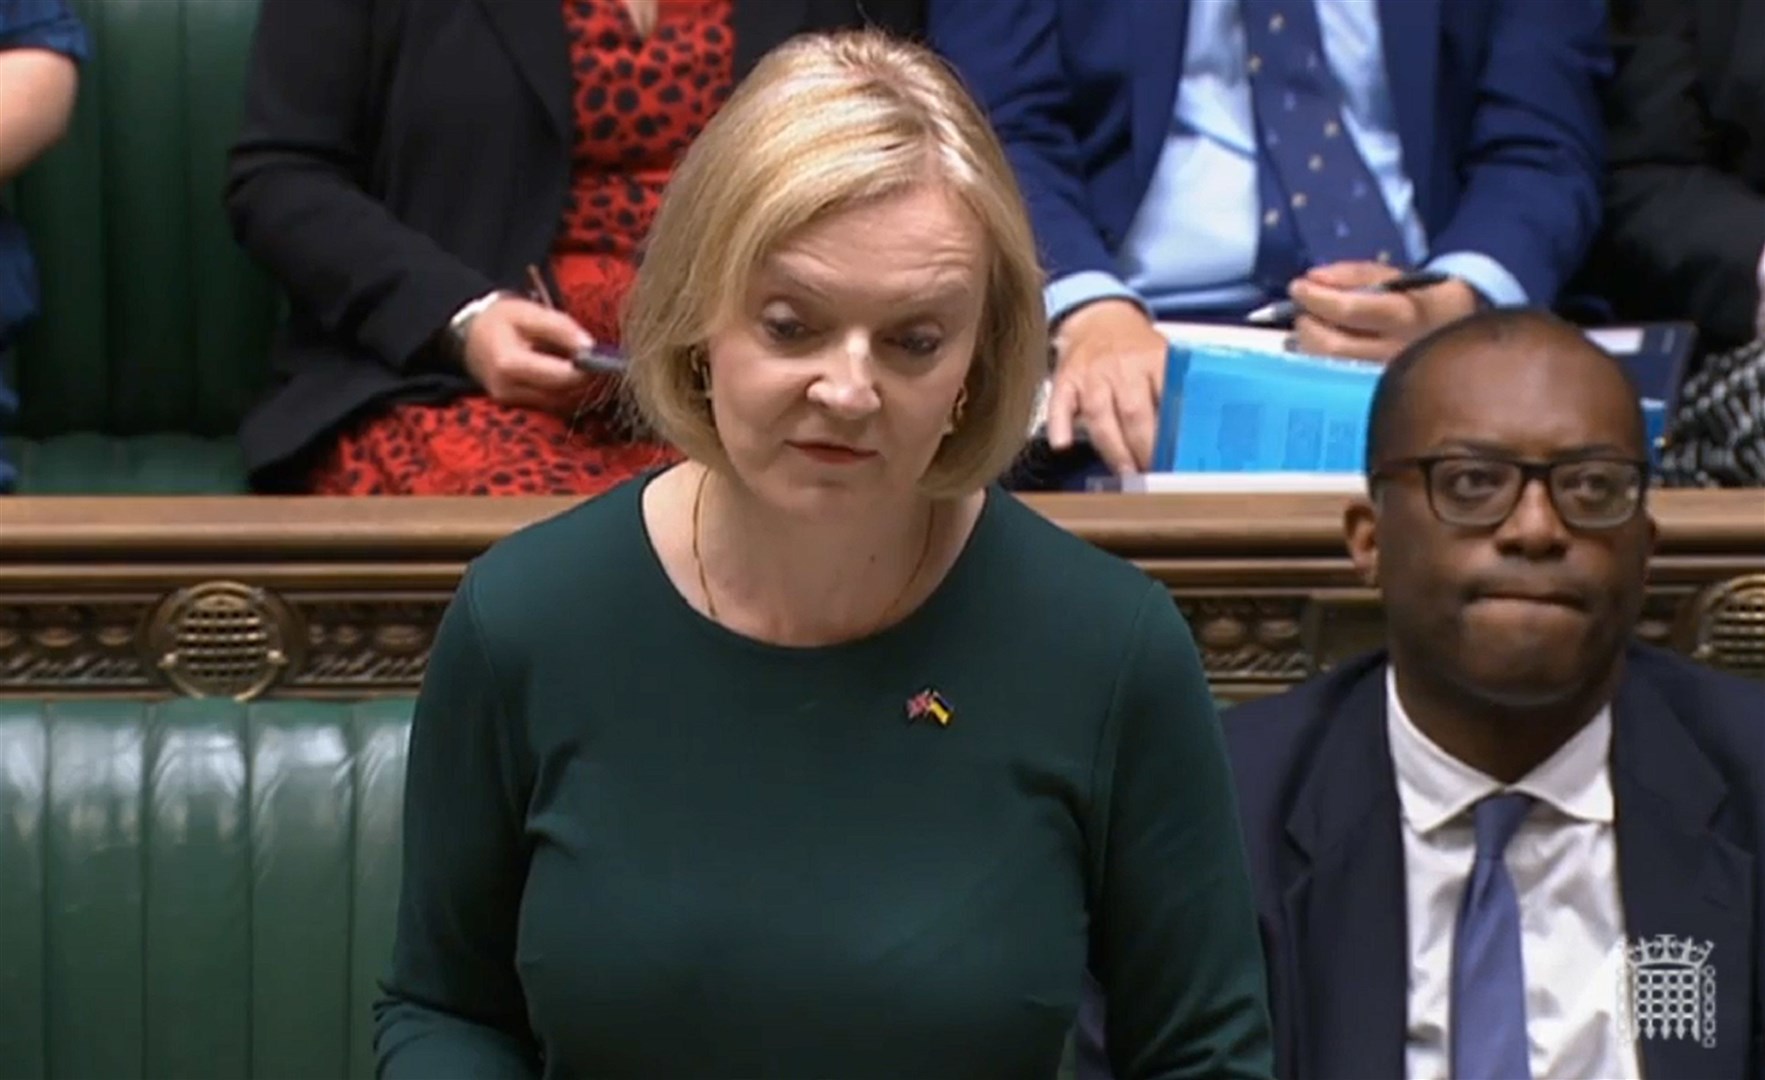 Prime Minister Liz Truss speaking in the House of Commons to set out her energy plan to shield households and businesses from soaring energy bills (House of Commons/PA)